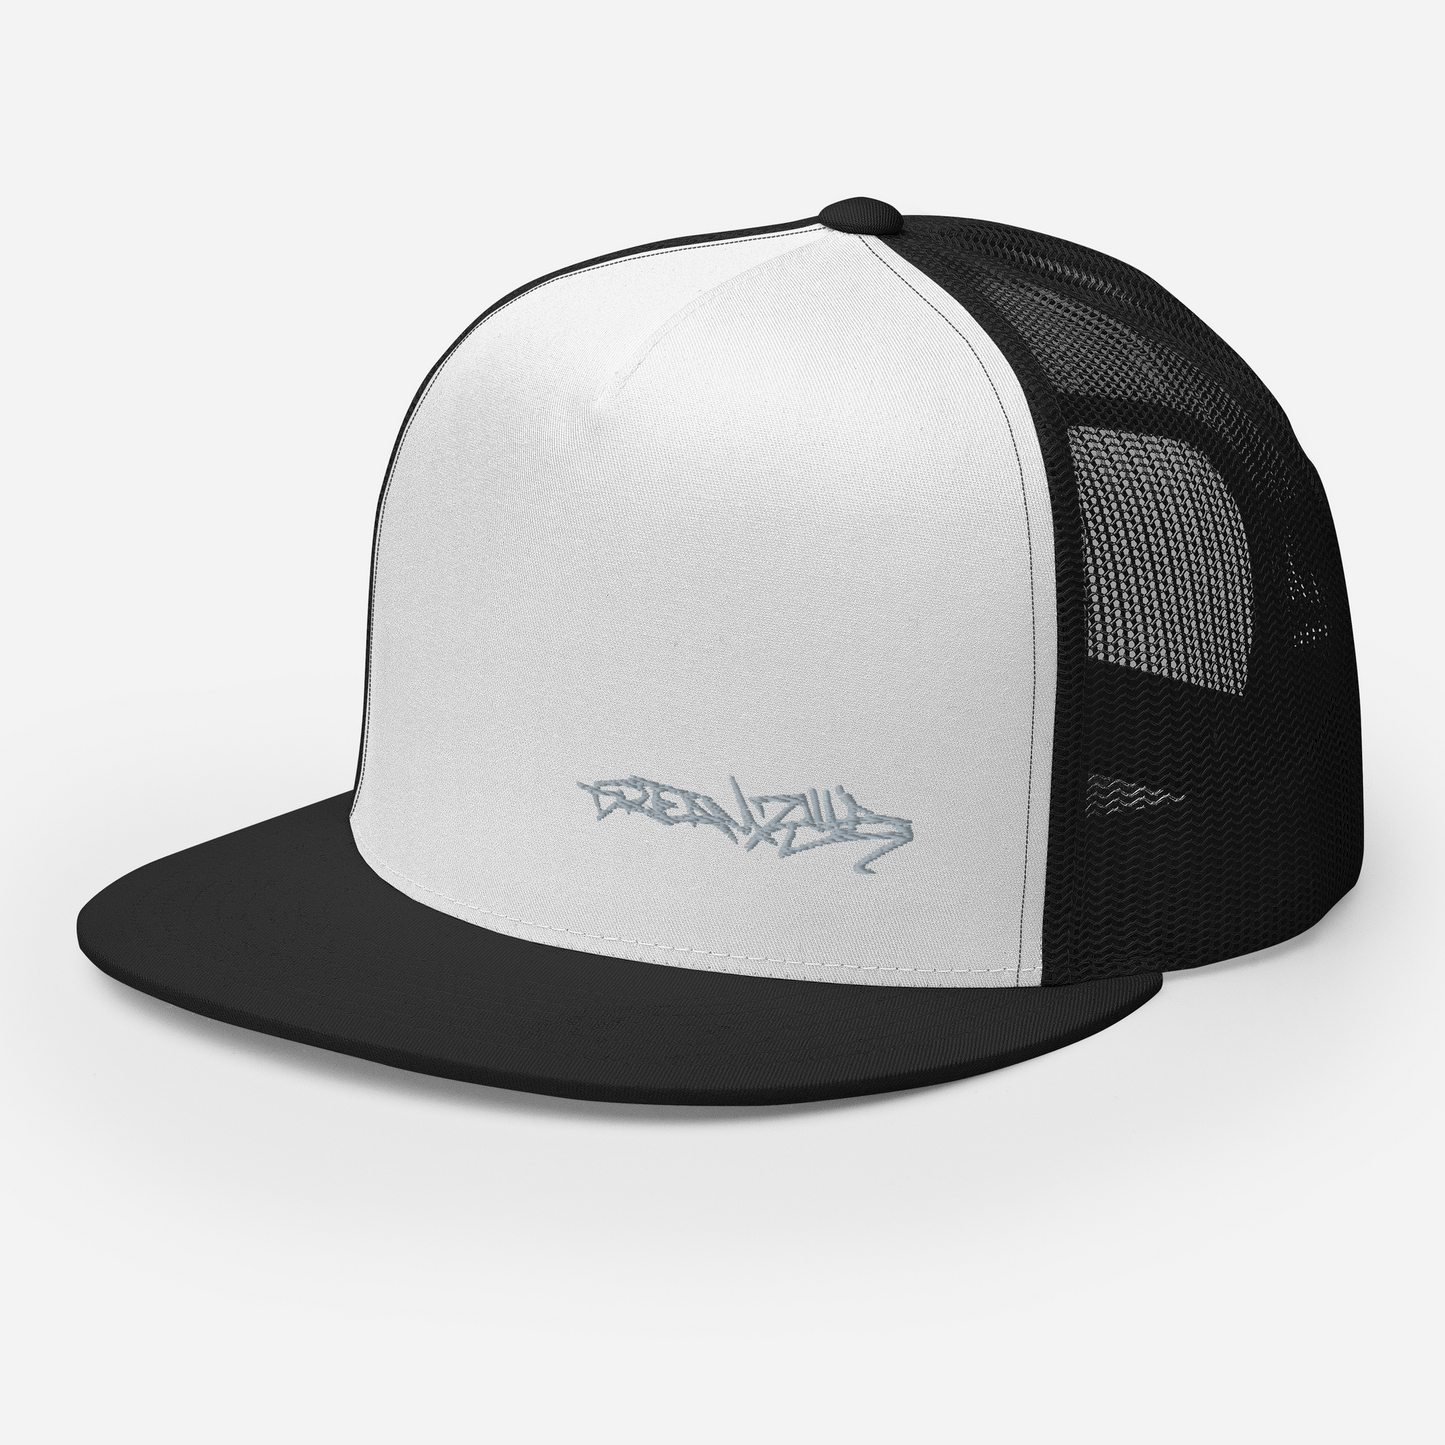 Front Left of Graffiti Tag Trucker Cap in White with Black Brim and Back